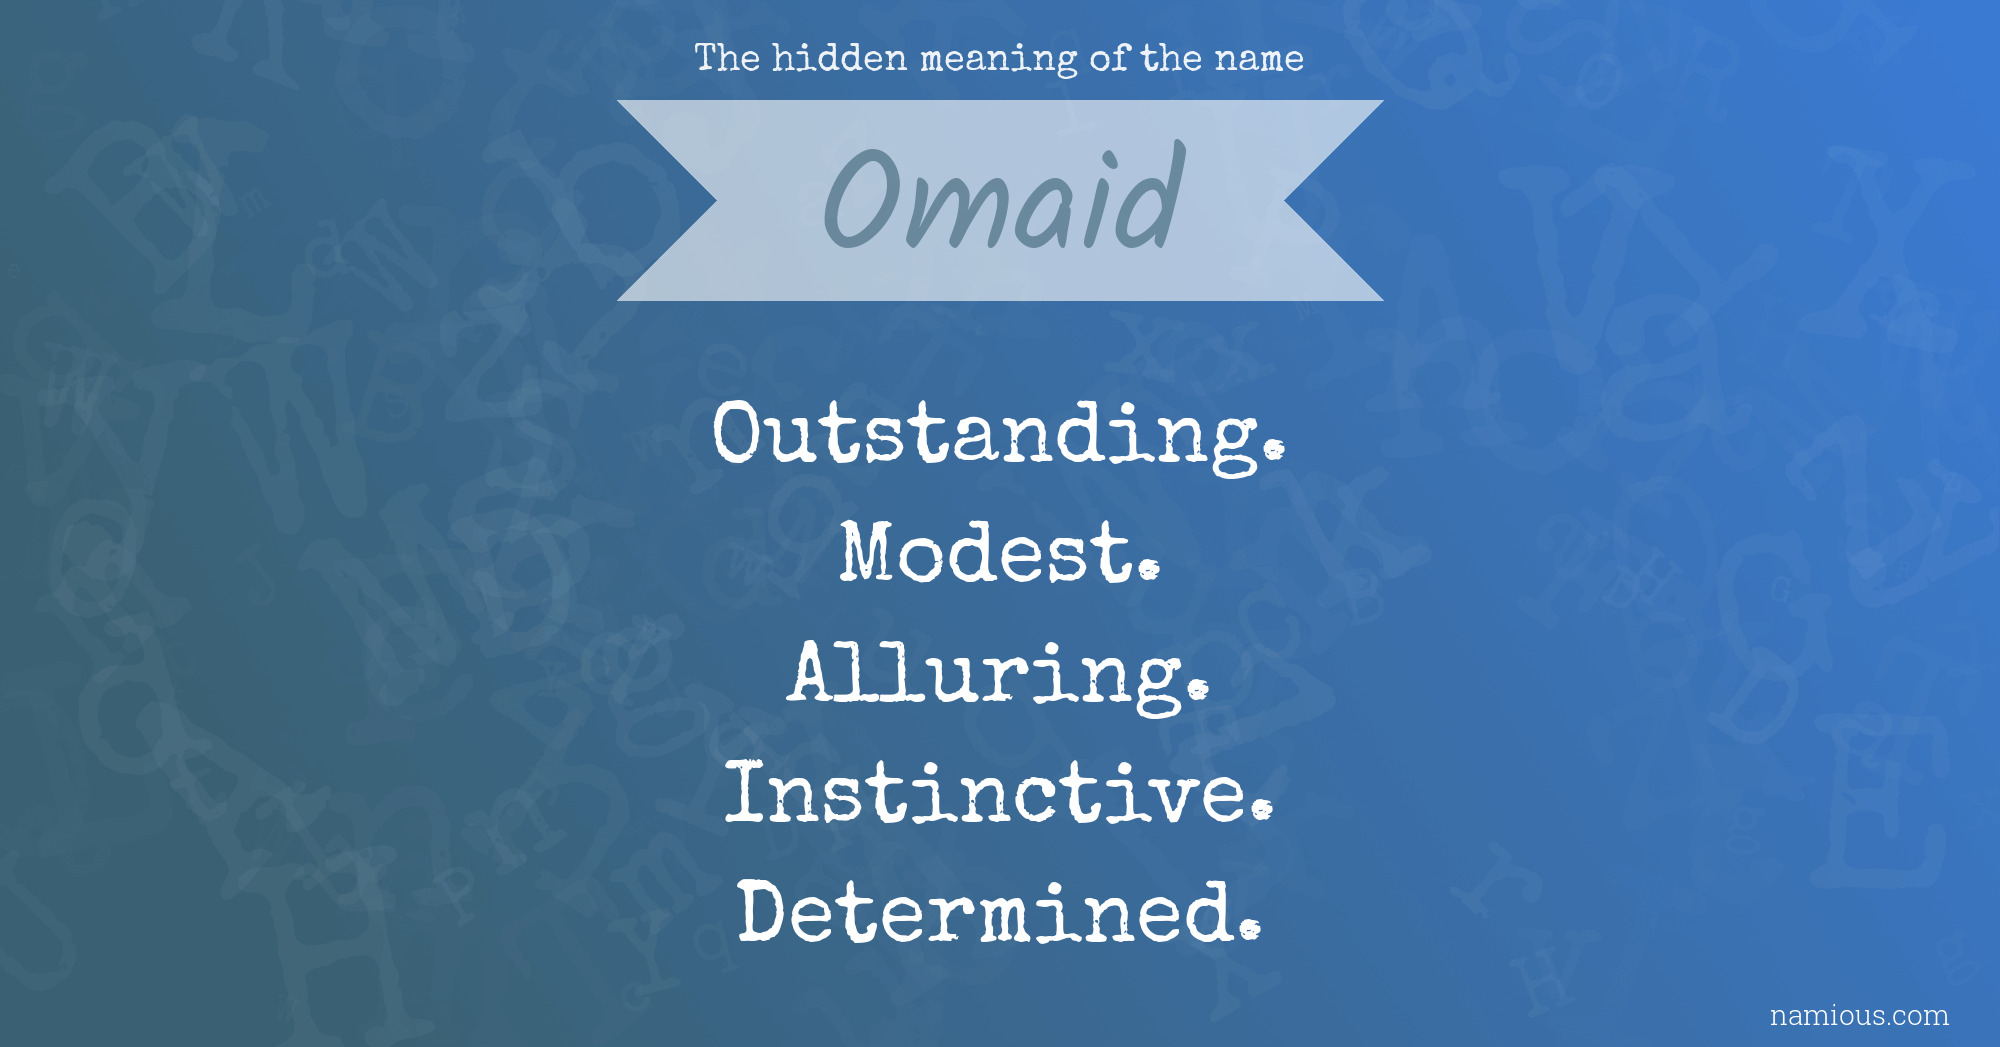 The hidden meaning of the name Omaid